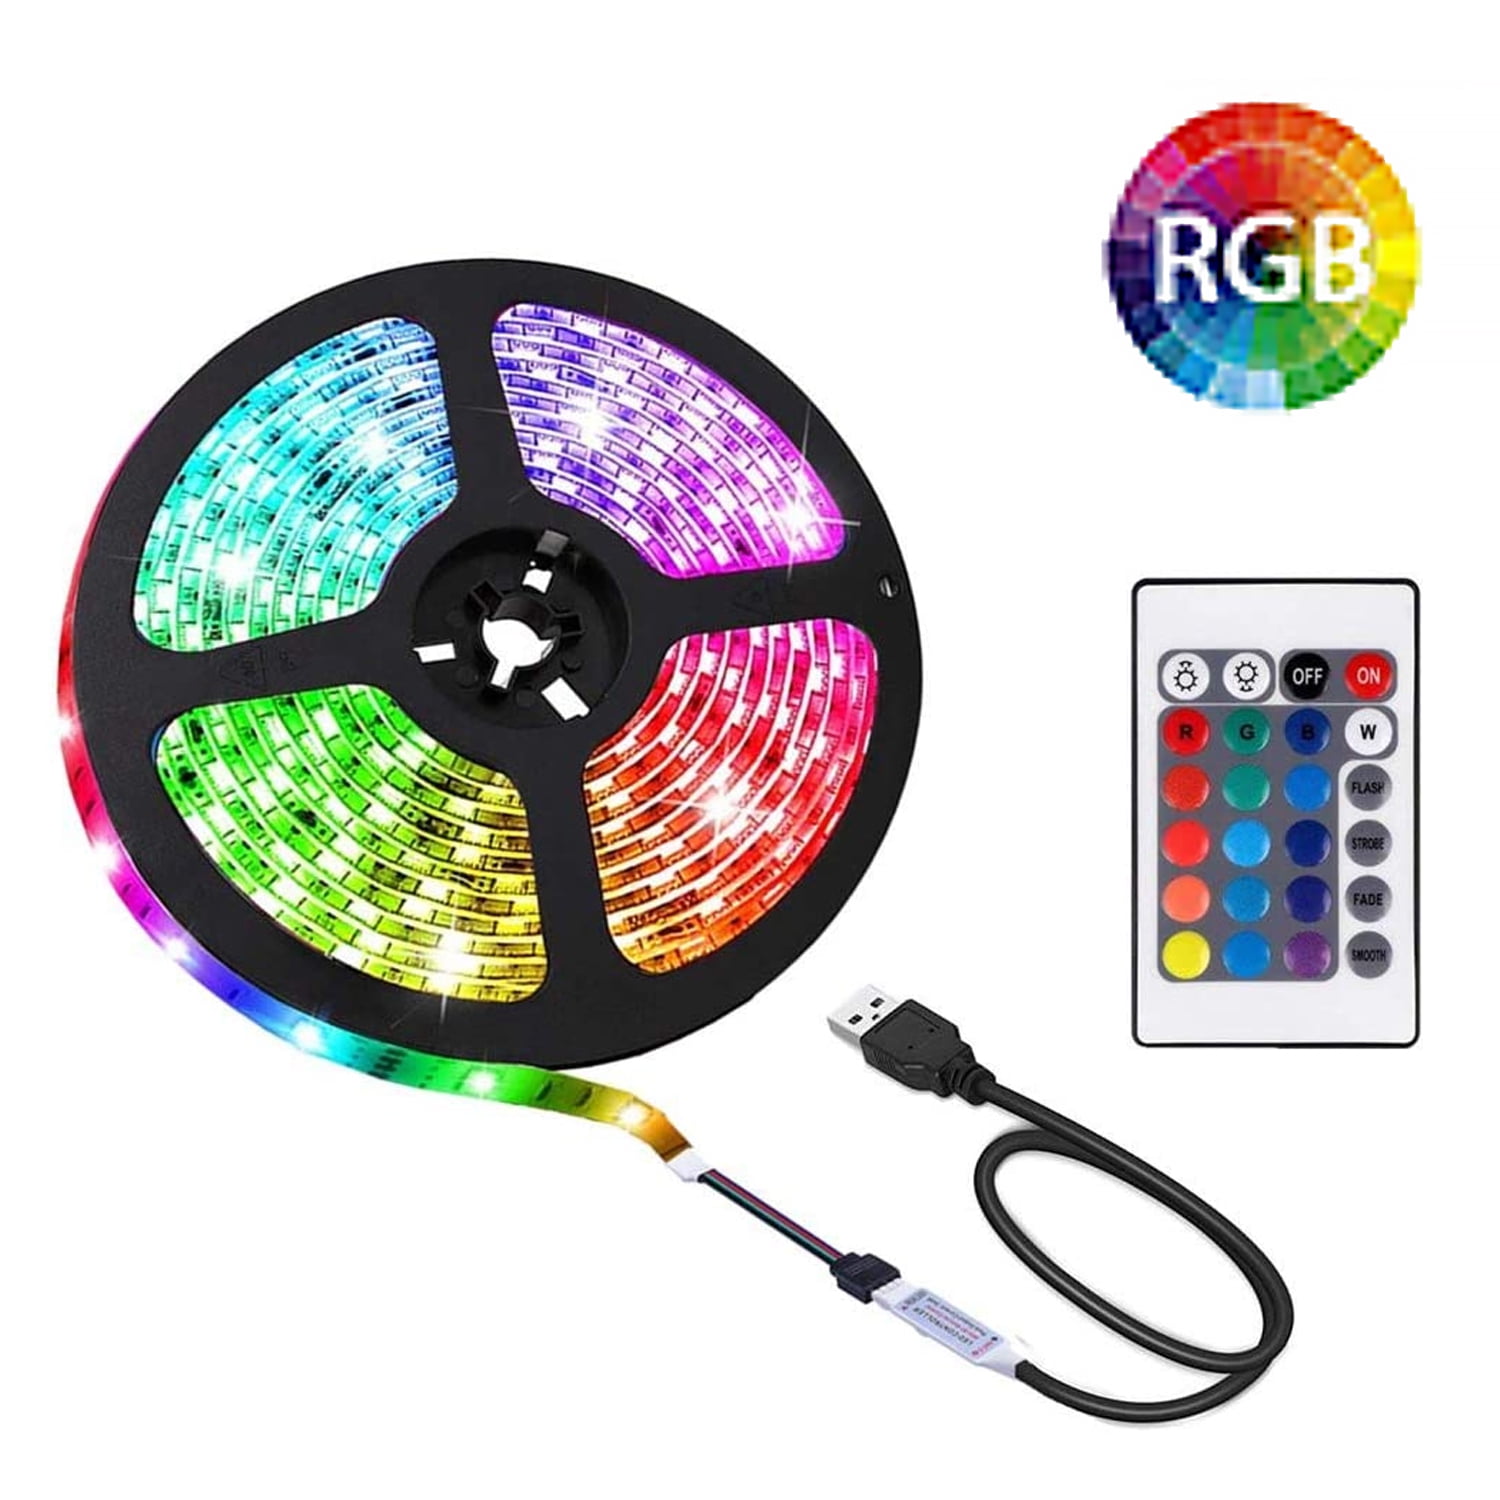 USB Led Strip Light RGB For BEDROOM With Remote Control Change Color WATERPROOF